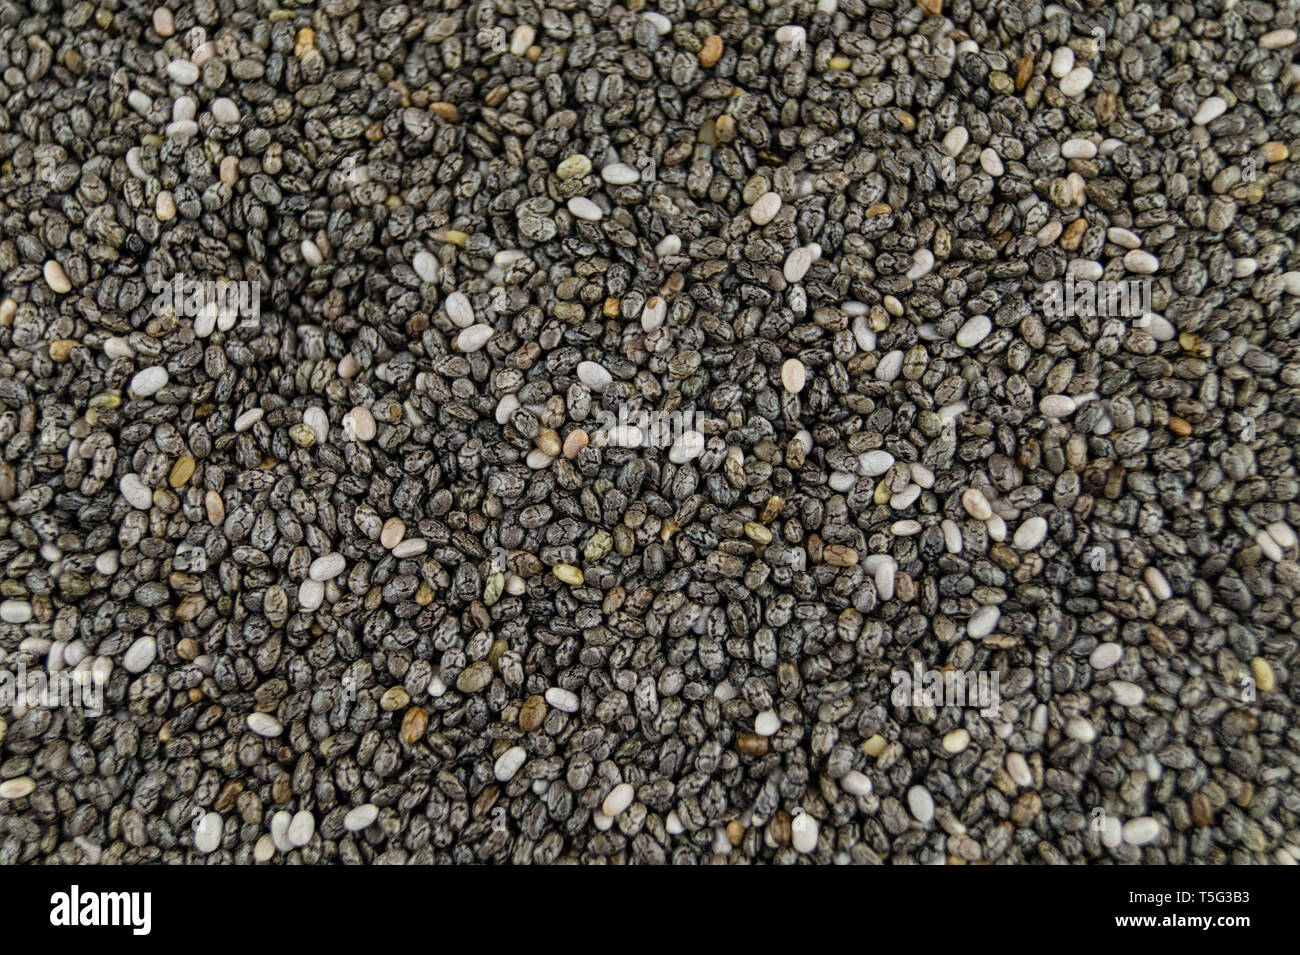 Superfood chia seeds Banque D'Images